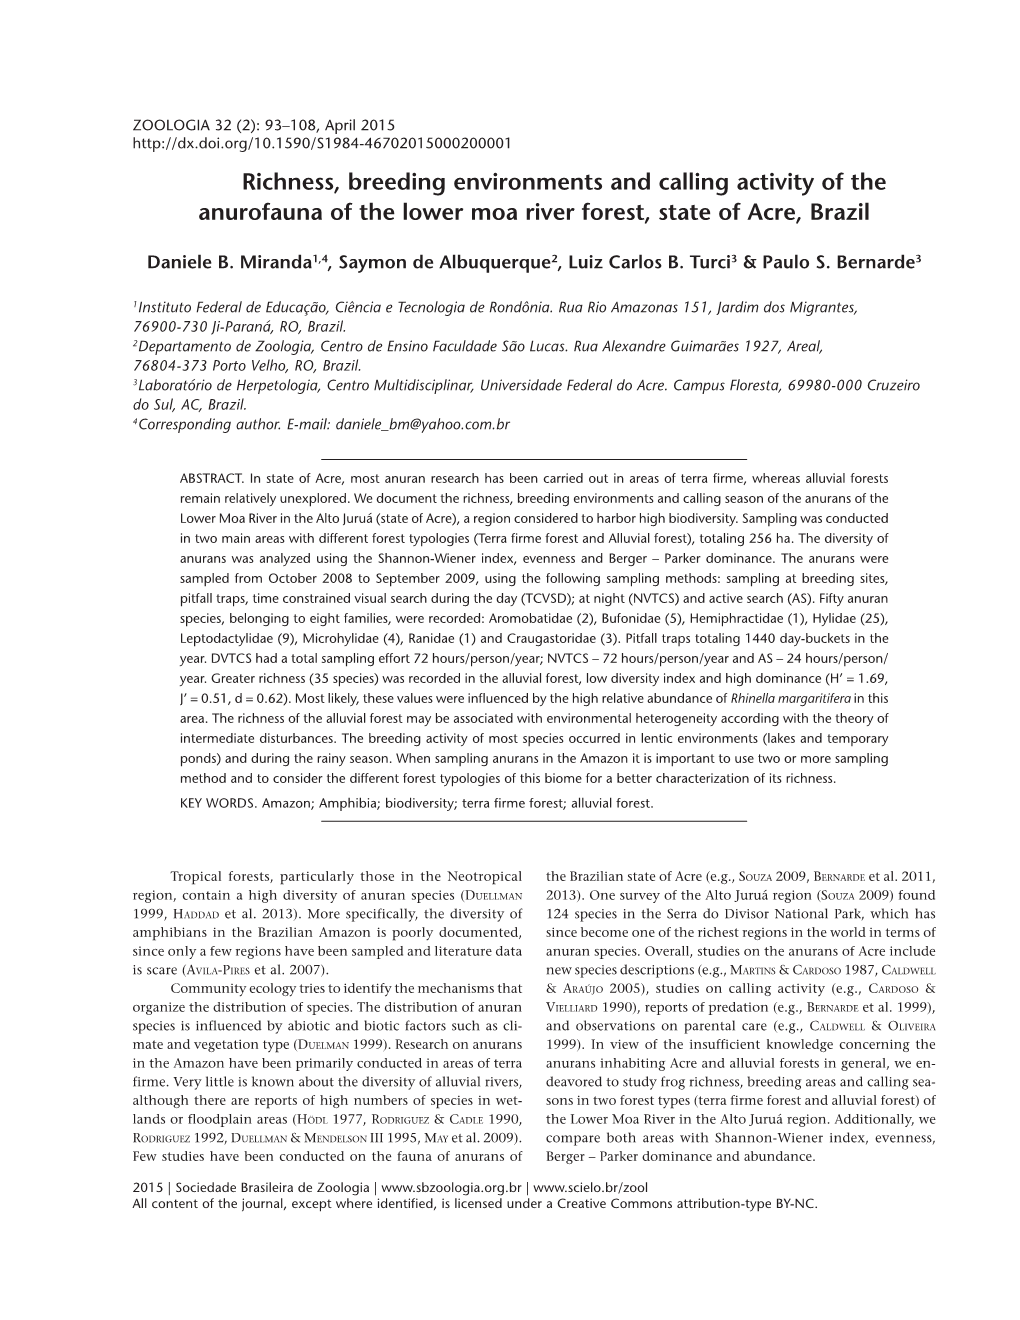 Richness, Breeding Environments and Calling Activity of the Anurofauna of the Lower Moa River Forest, State of Acre, Brazil